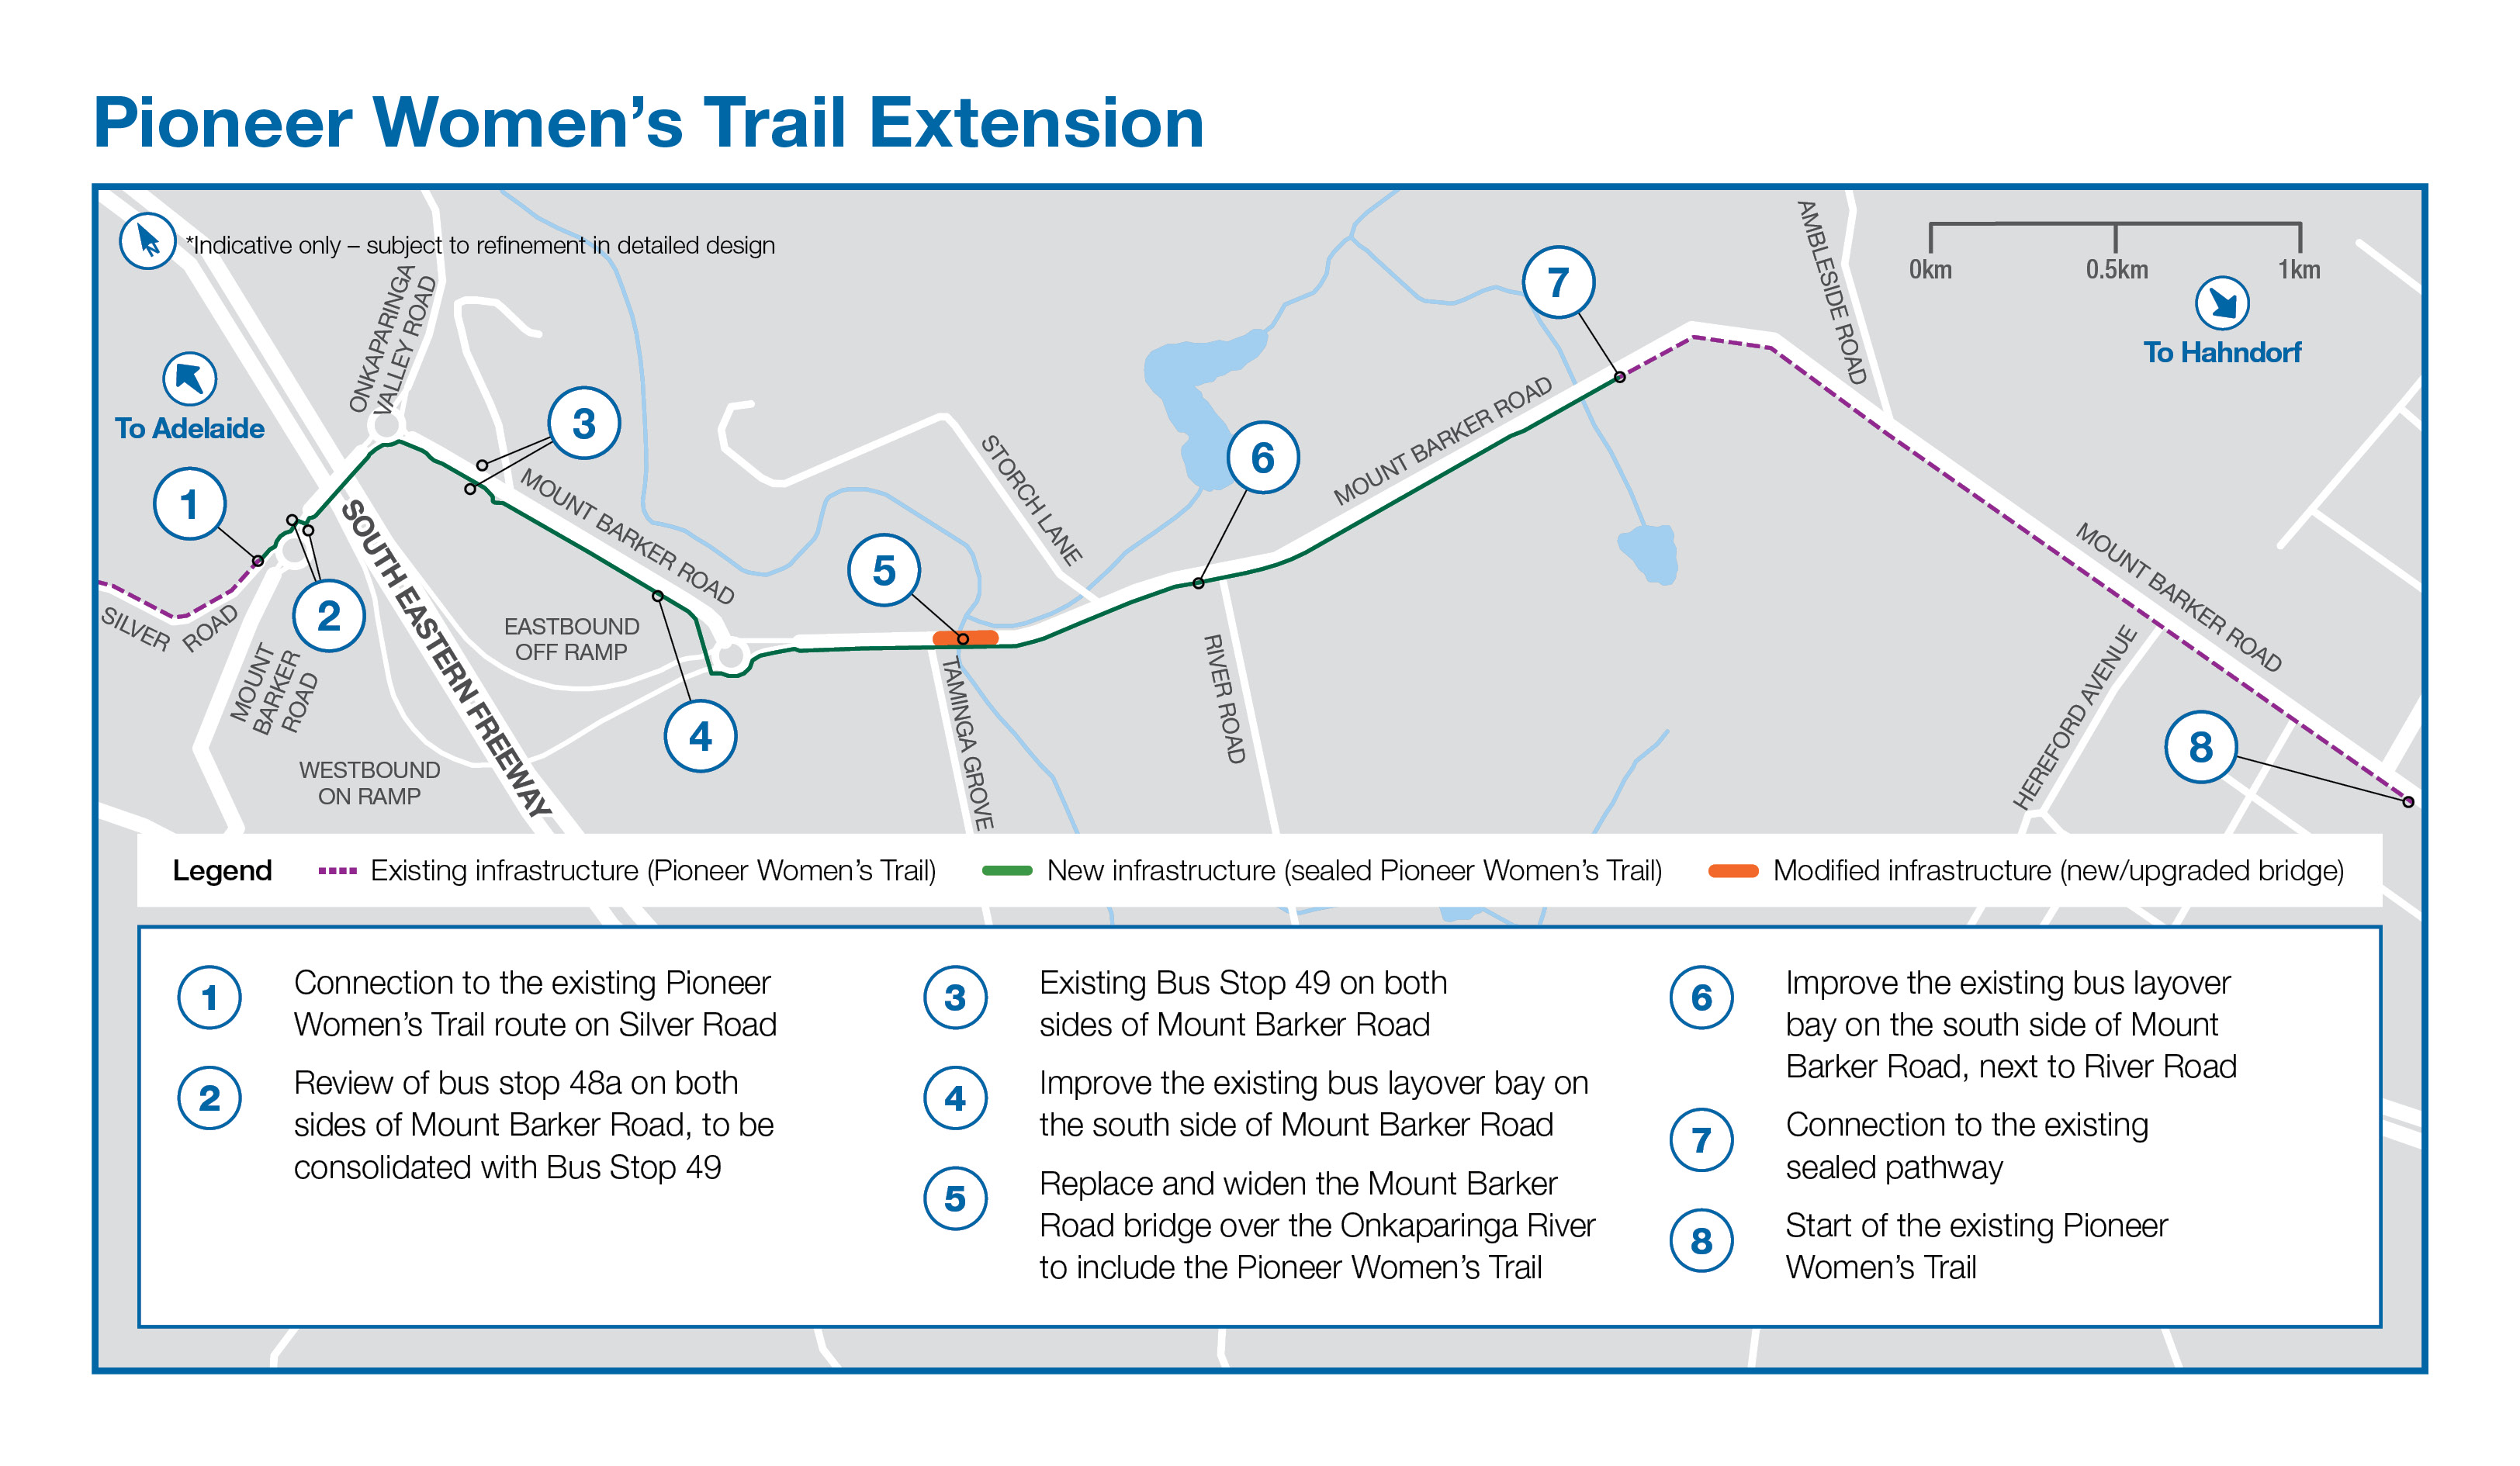 Pioneer women's trail extension image